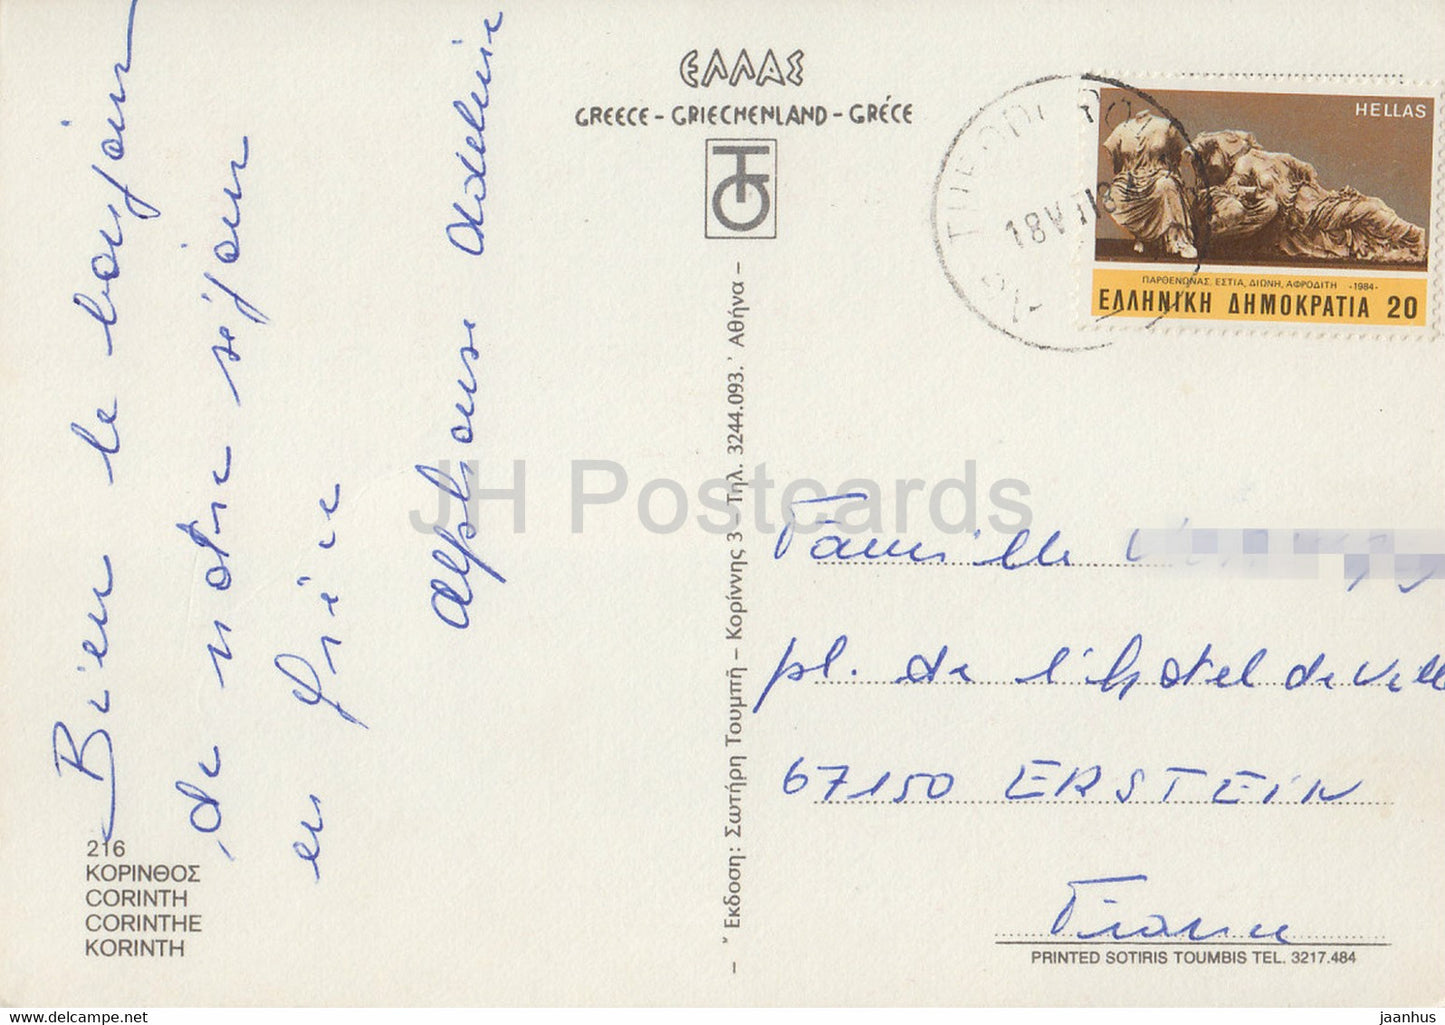 Souvenir from Corinth - ship - train - multiview - 1984 - Greece - used